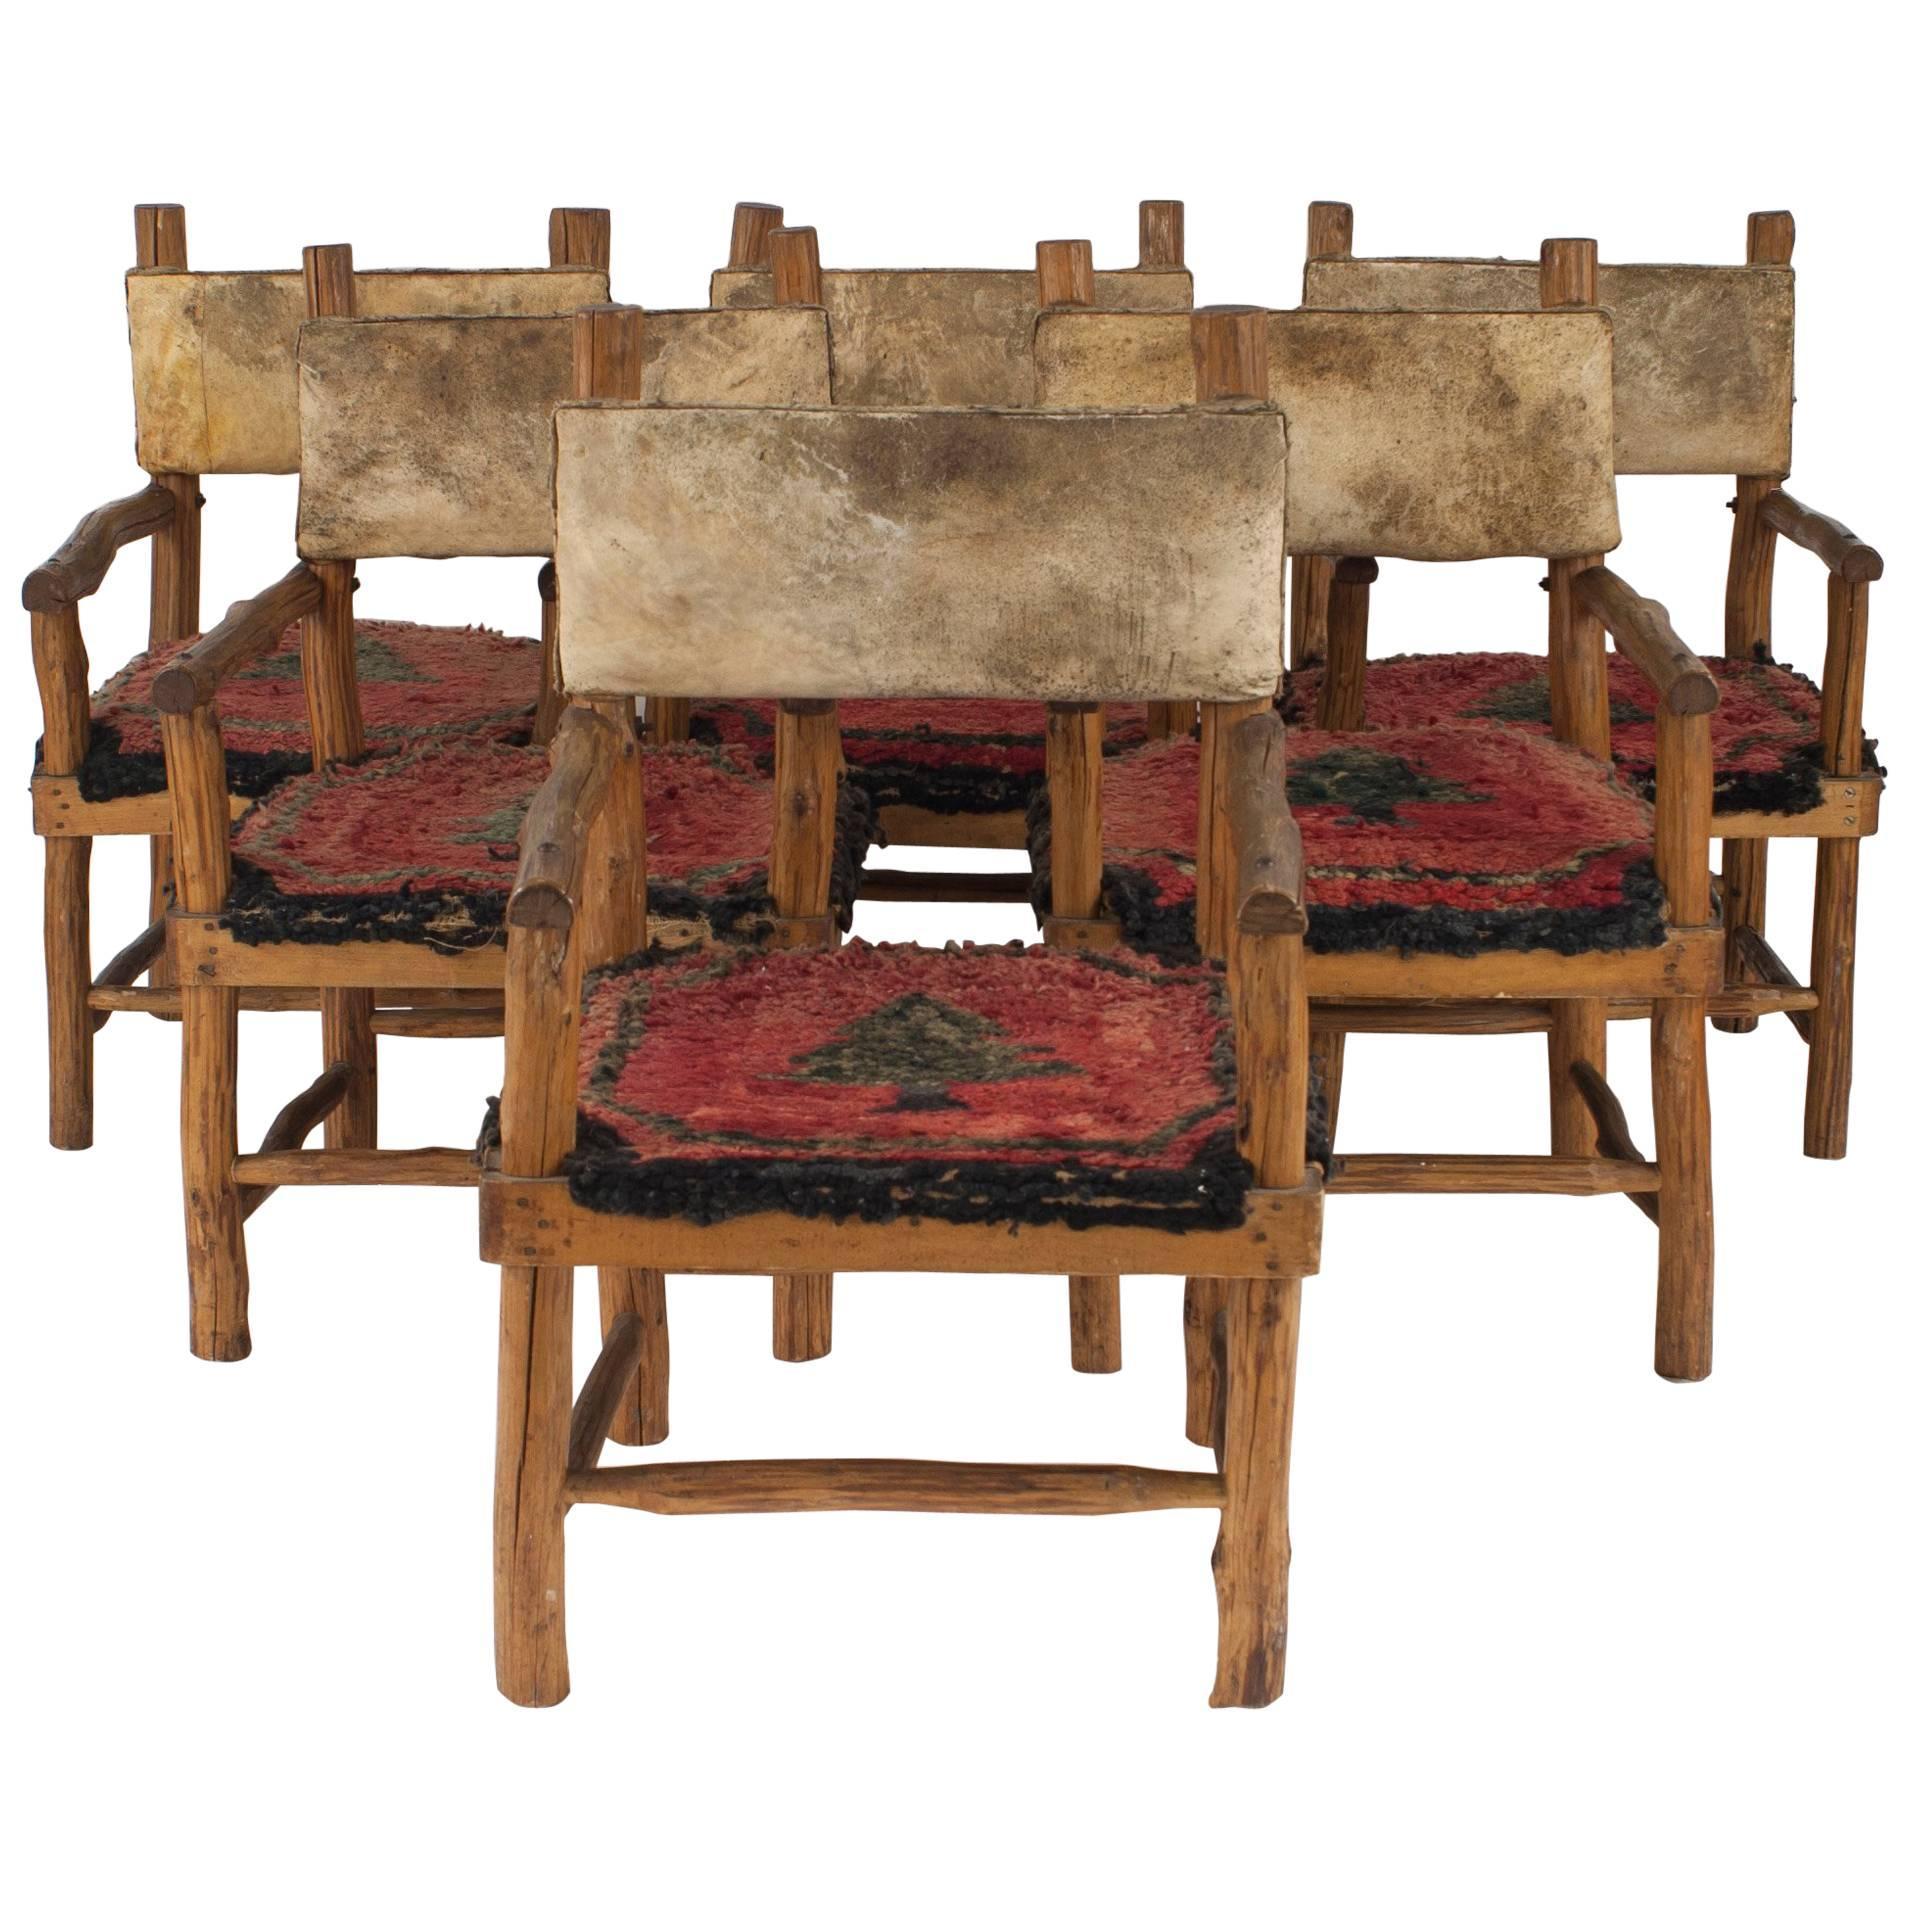 Set of 6 Rustic Adirondack Hooked Rug Arm Chairs For Sale